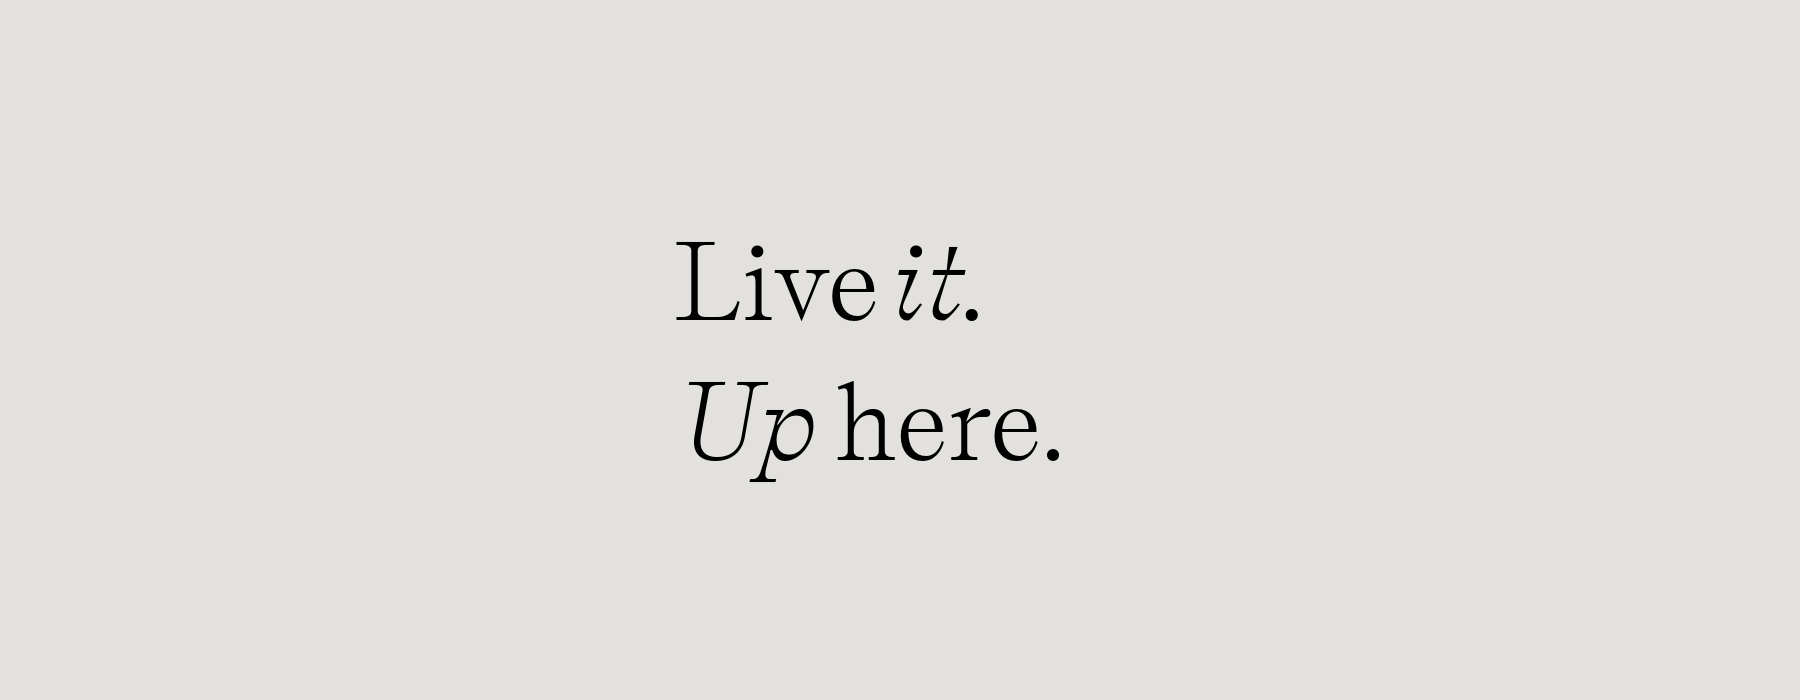 Live it. Up here.